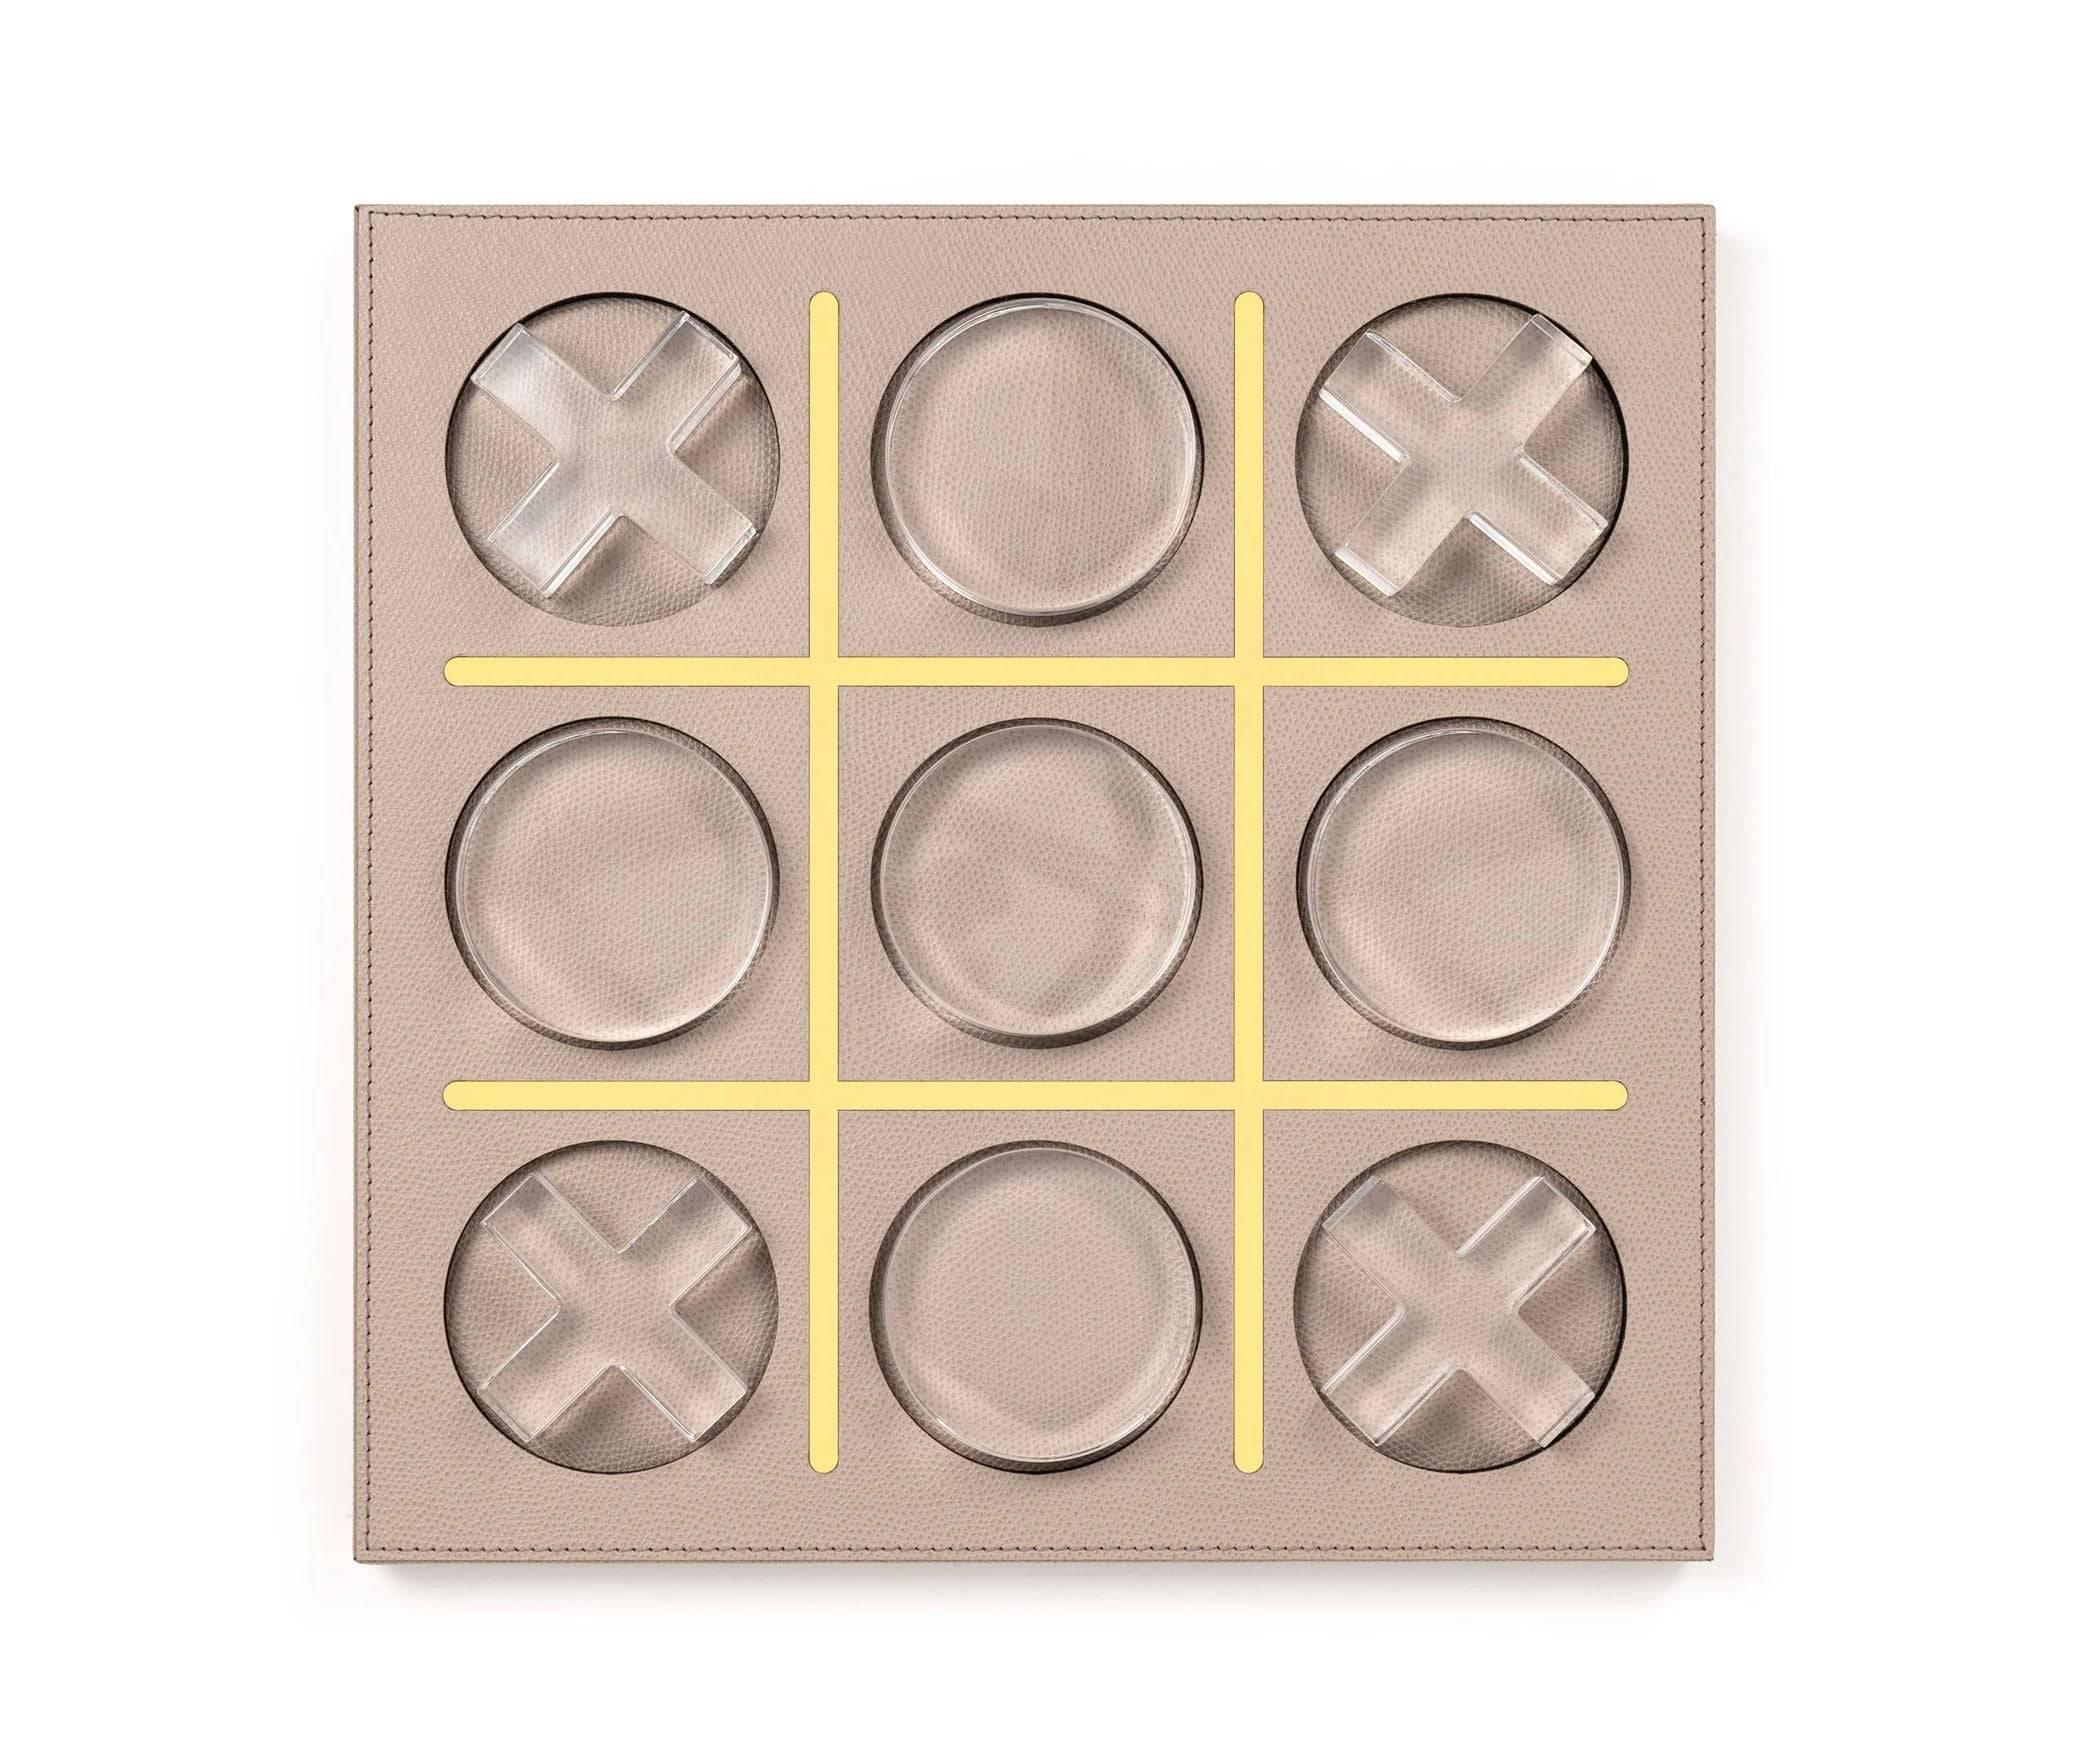 Family Games Boston Tris - Tic Tac Toe 39X39XH2.5 cm Grained Leather Taupe Pinetti